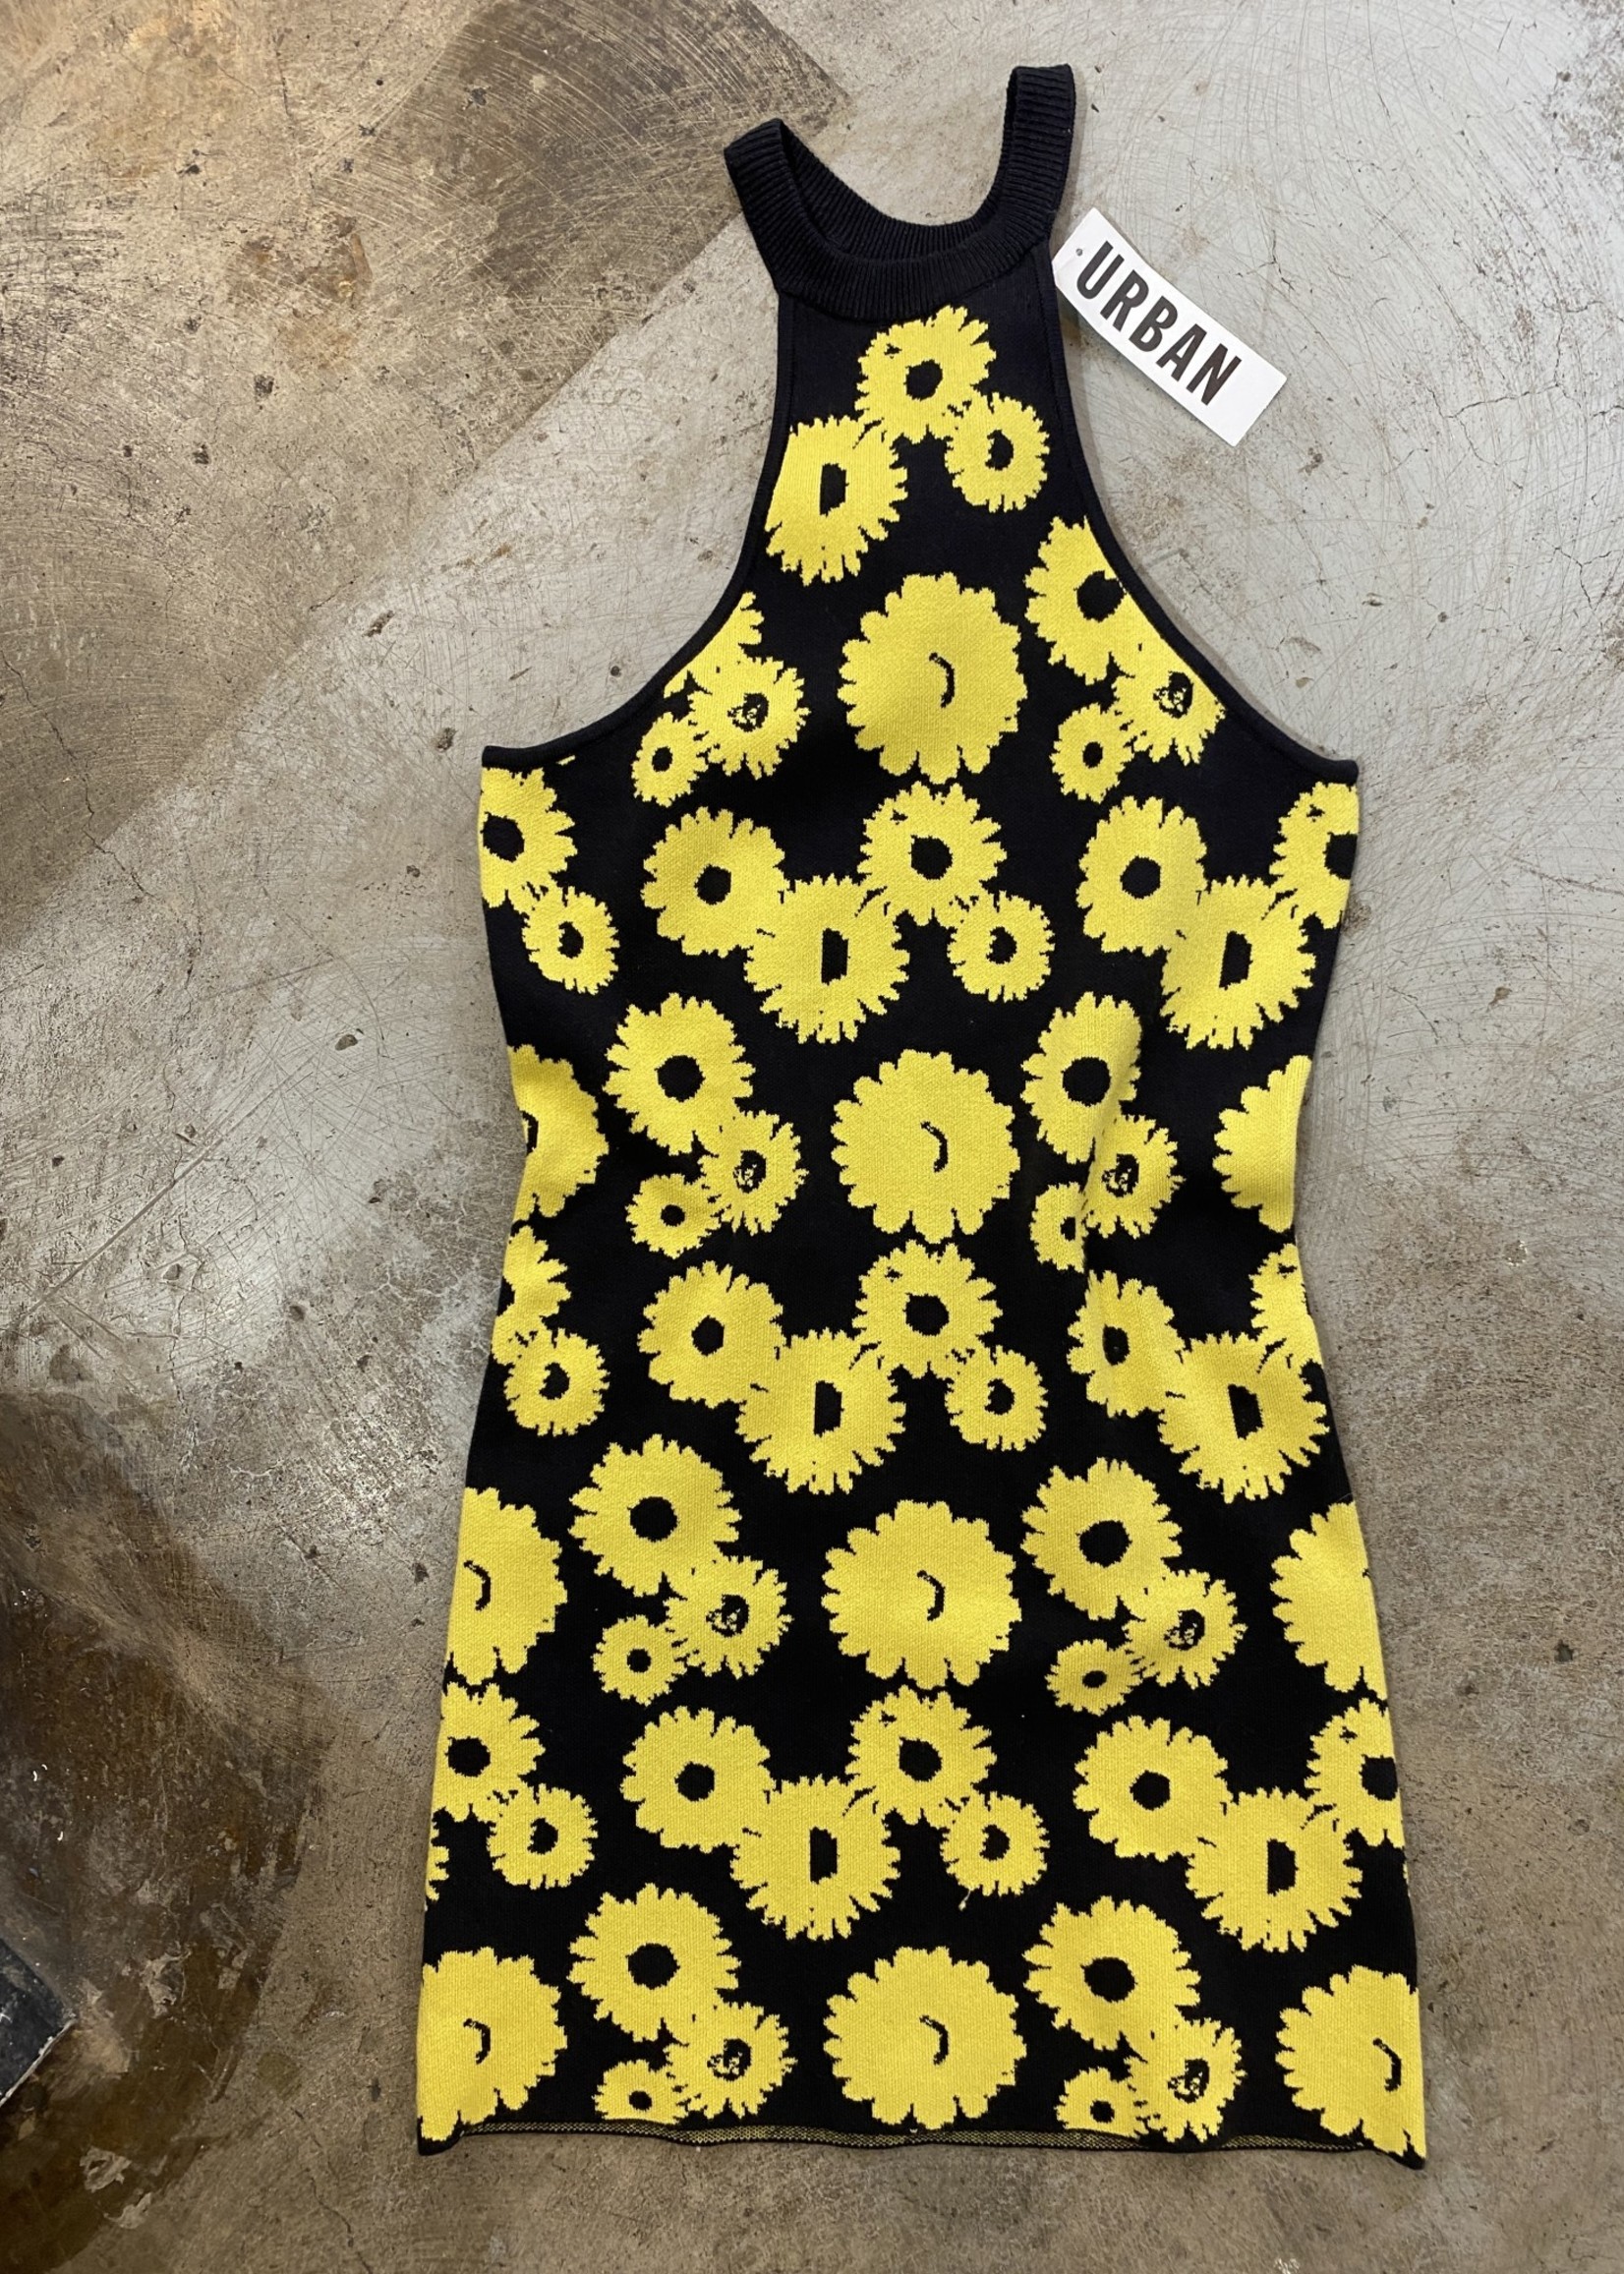 NWT Urban Outfitters Sunflower Dress M